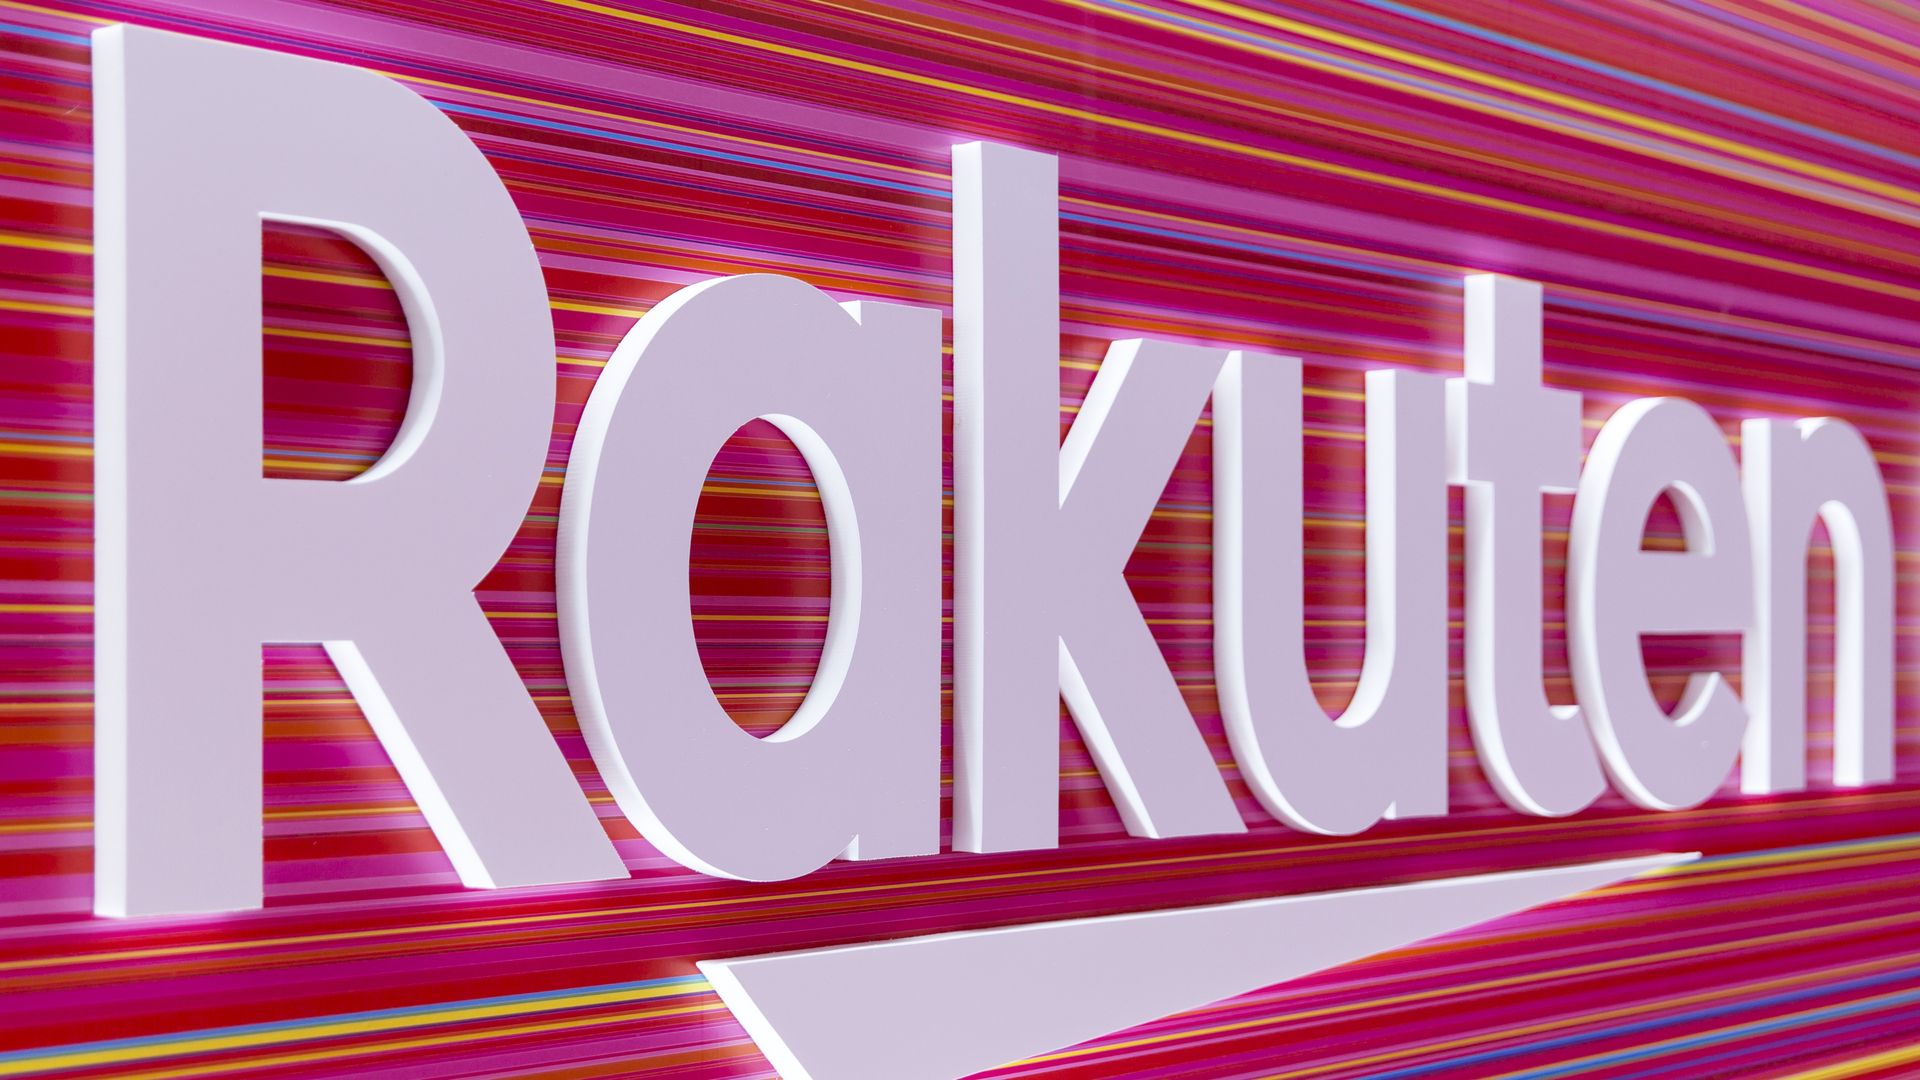 Rakuten's name is spelled out in white lettering against a pink-infused background.